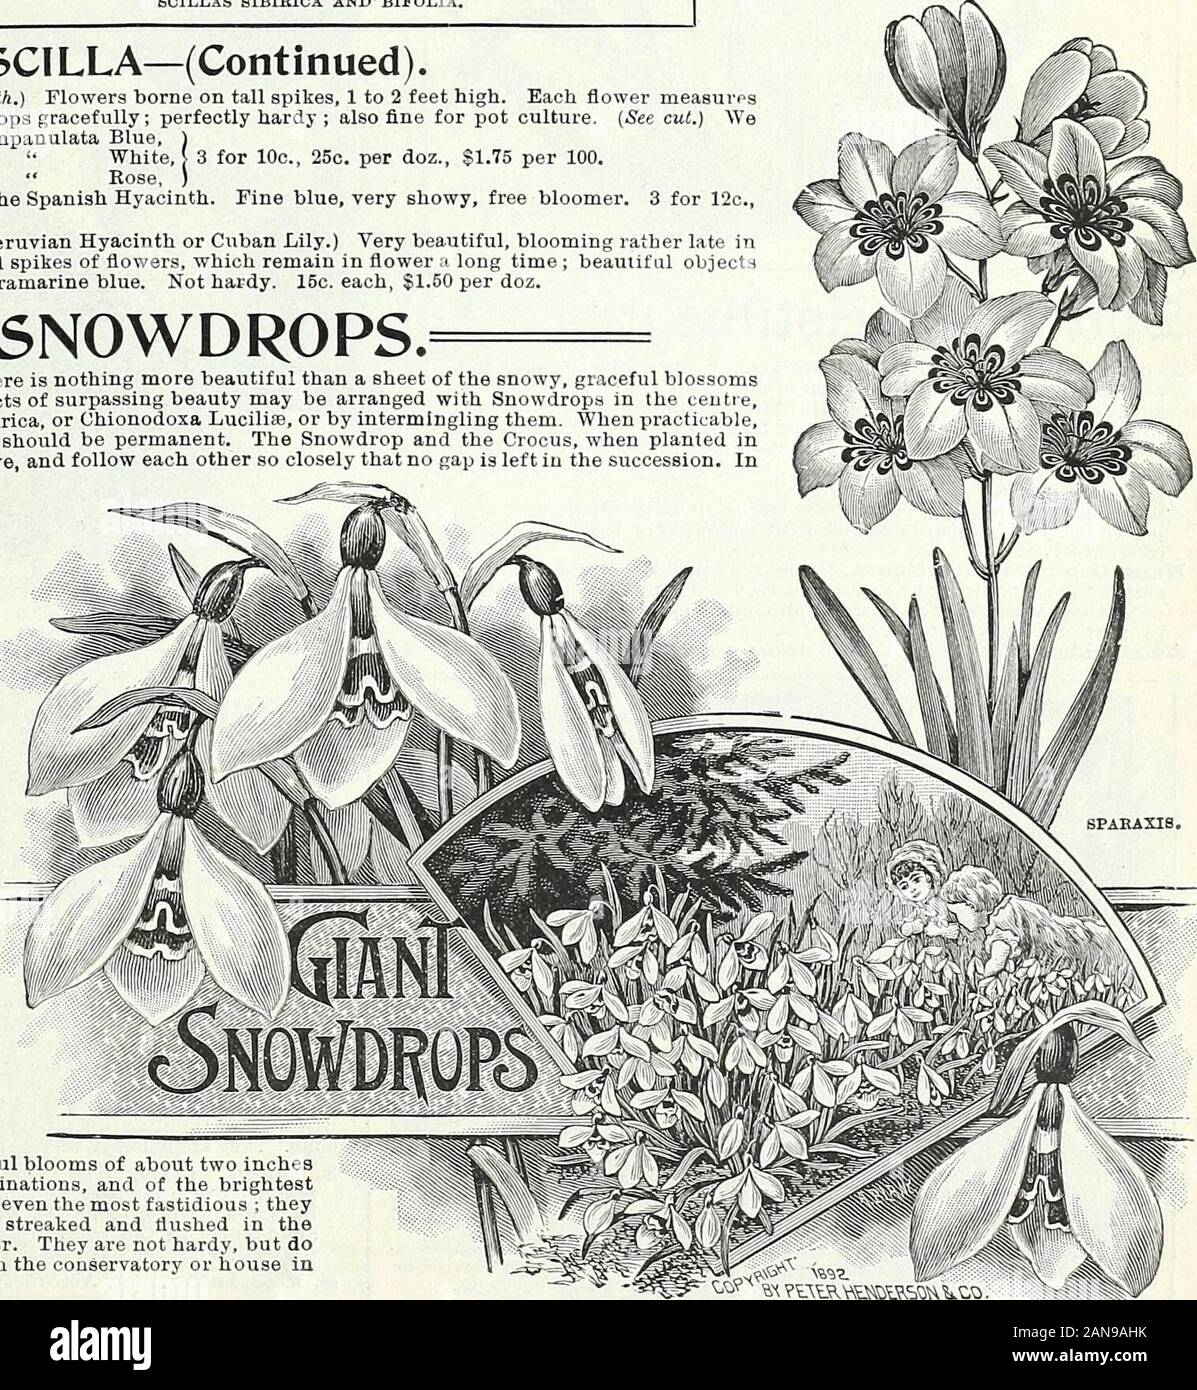 Bulbs, plants, and seeds for autumn planting : 1897 . mingling them. When  practicable,Buch plantings of the Snowdrops should be permanent. The  Snowdrop and the Crocus, when planted inalternate circles, are very